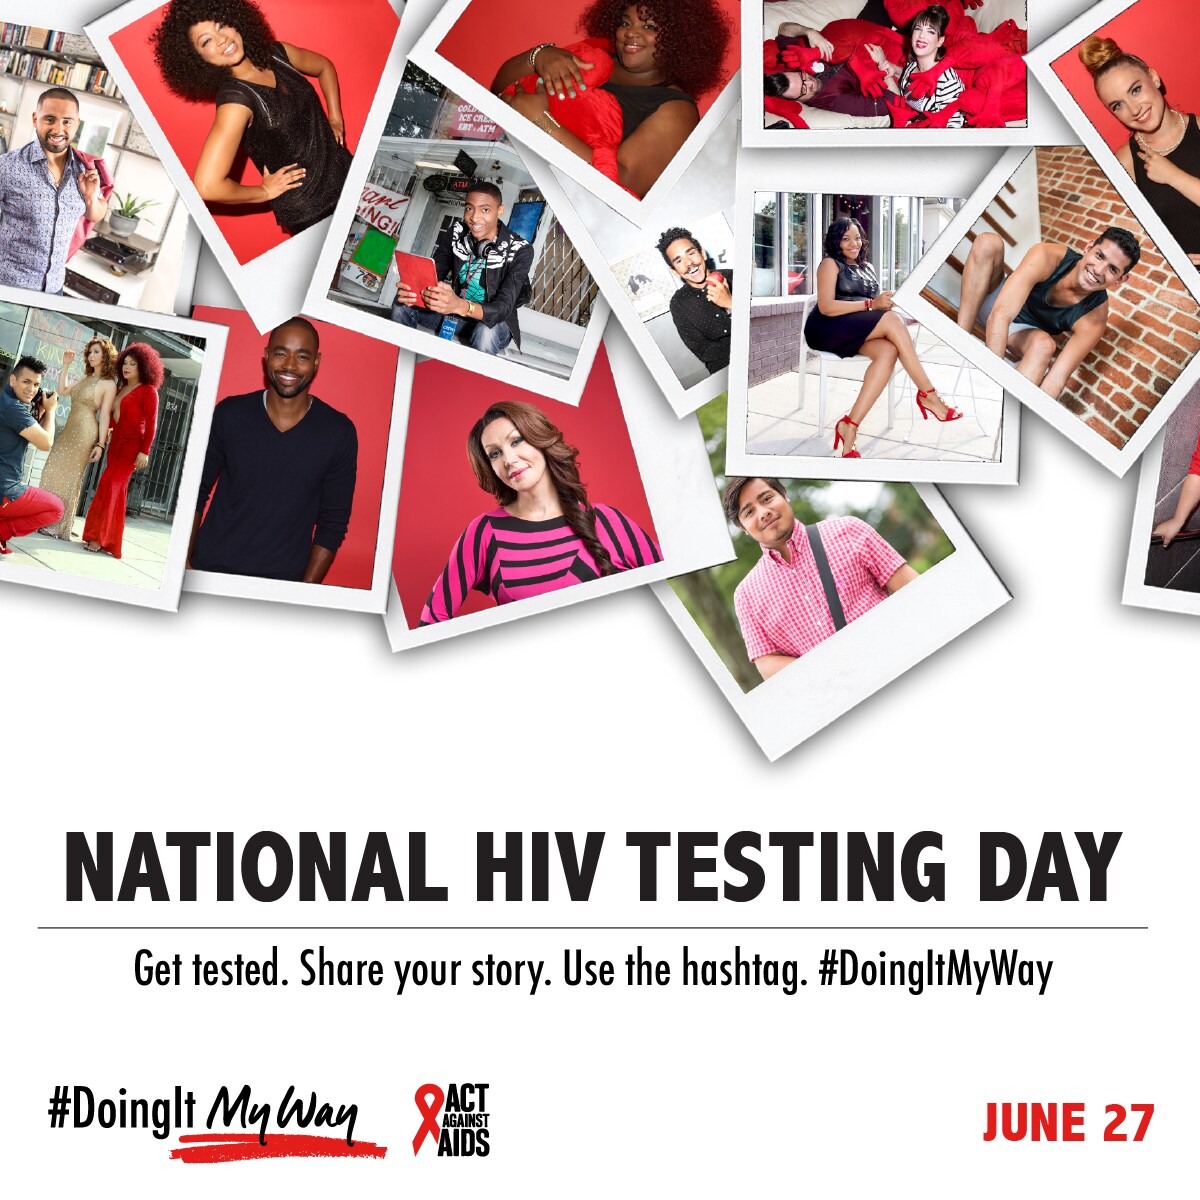 National HIV Testing Day is on June 27. Get tested. Share your story. Use the hashtag. #DoingItMyWay